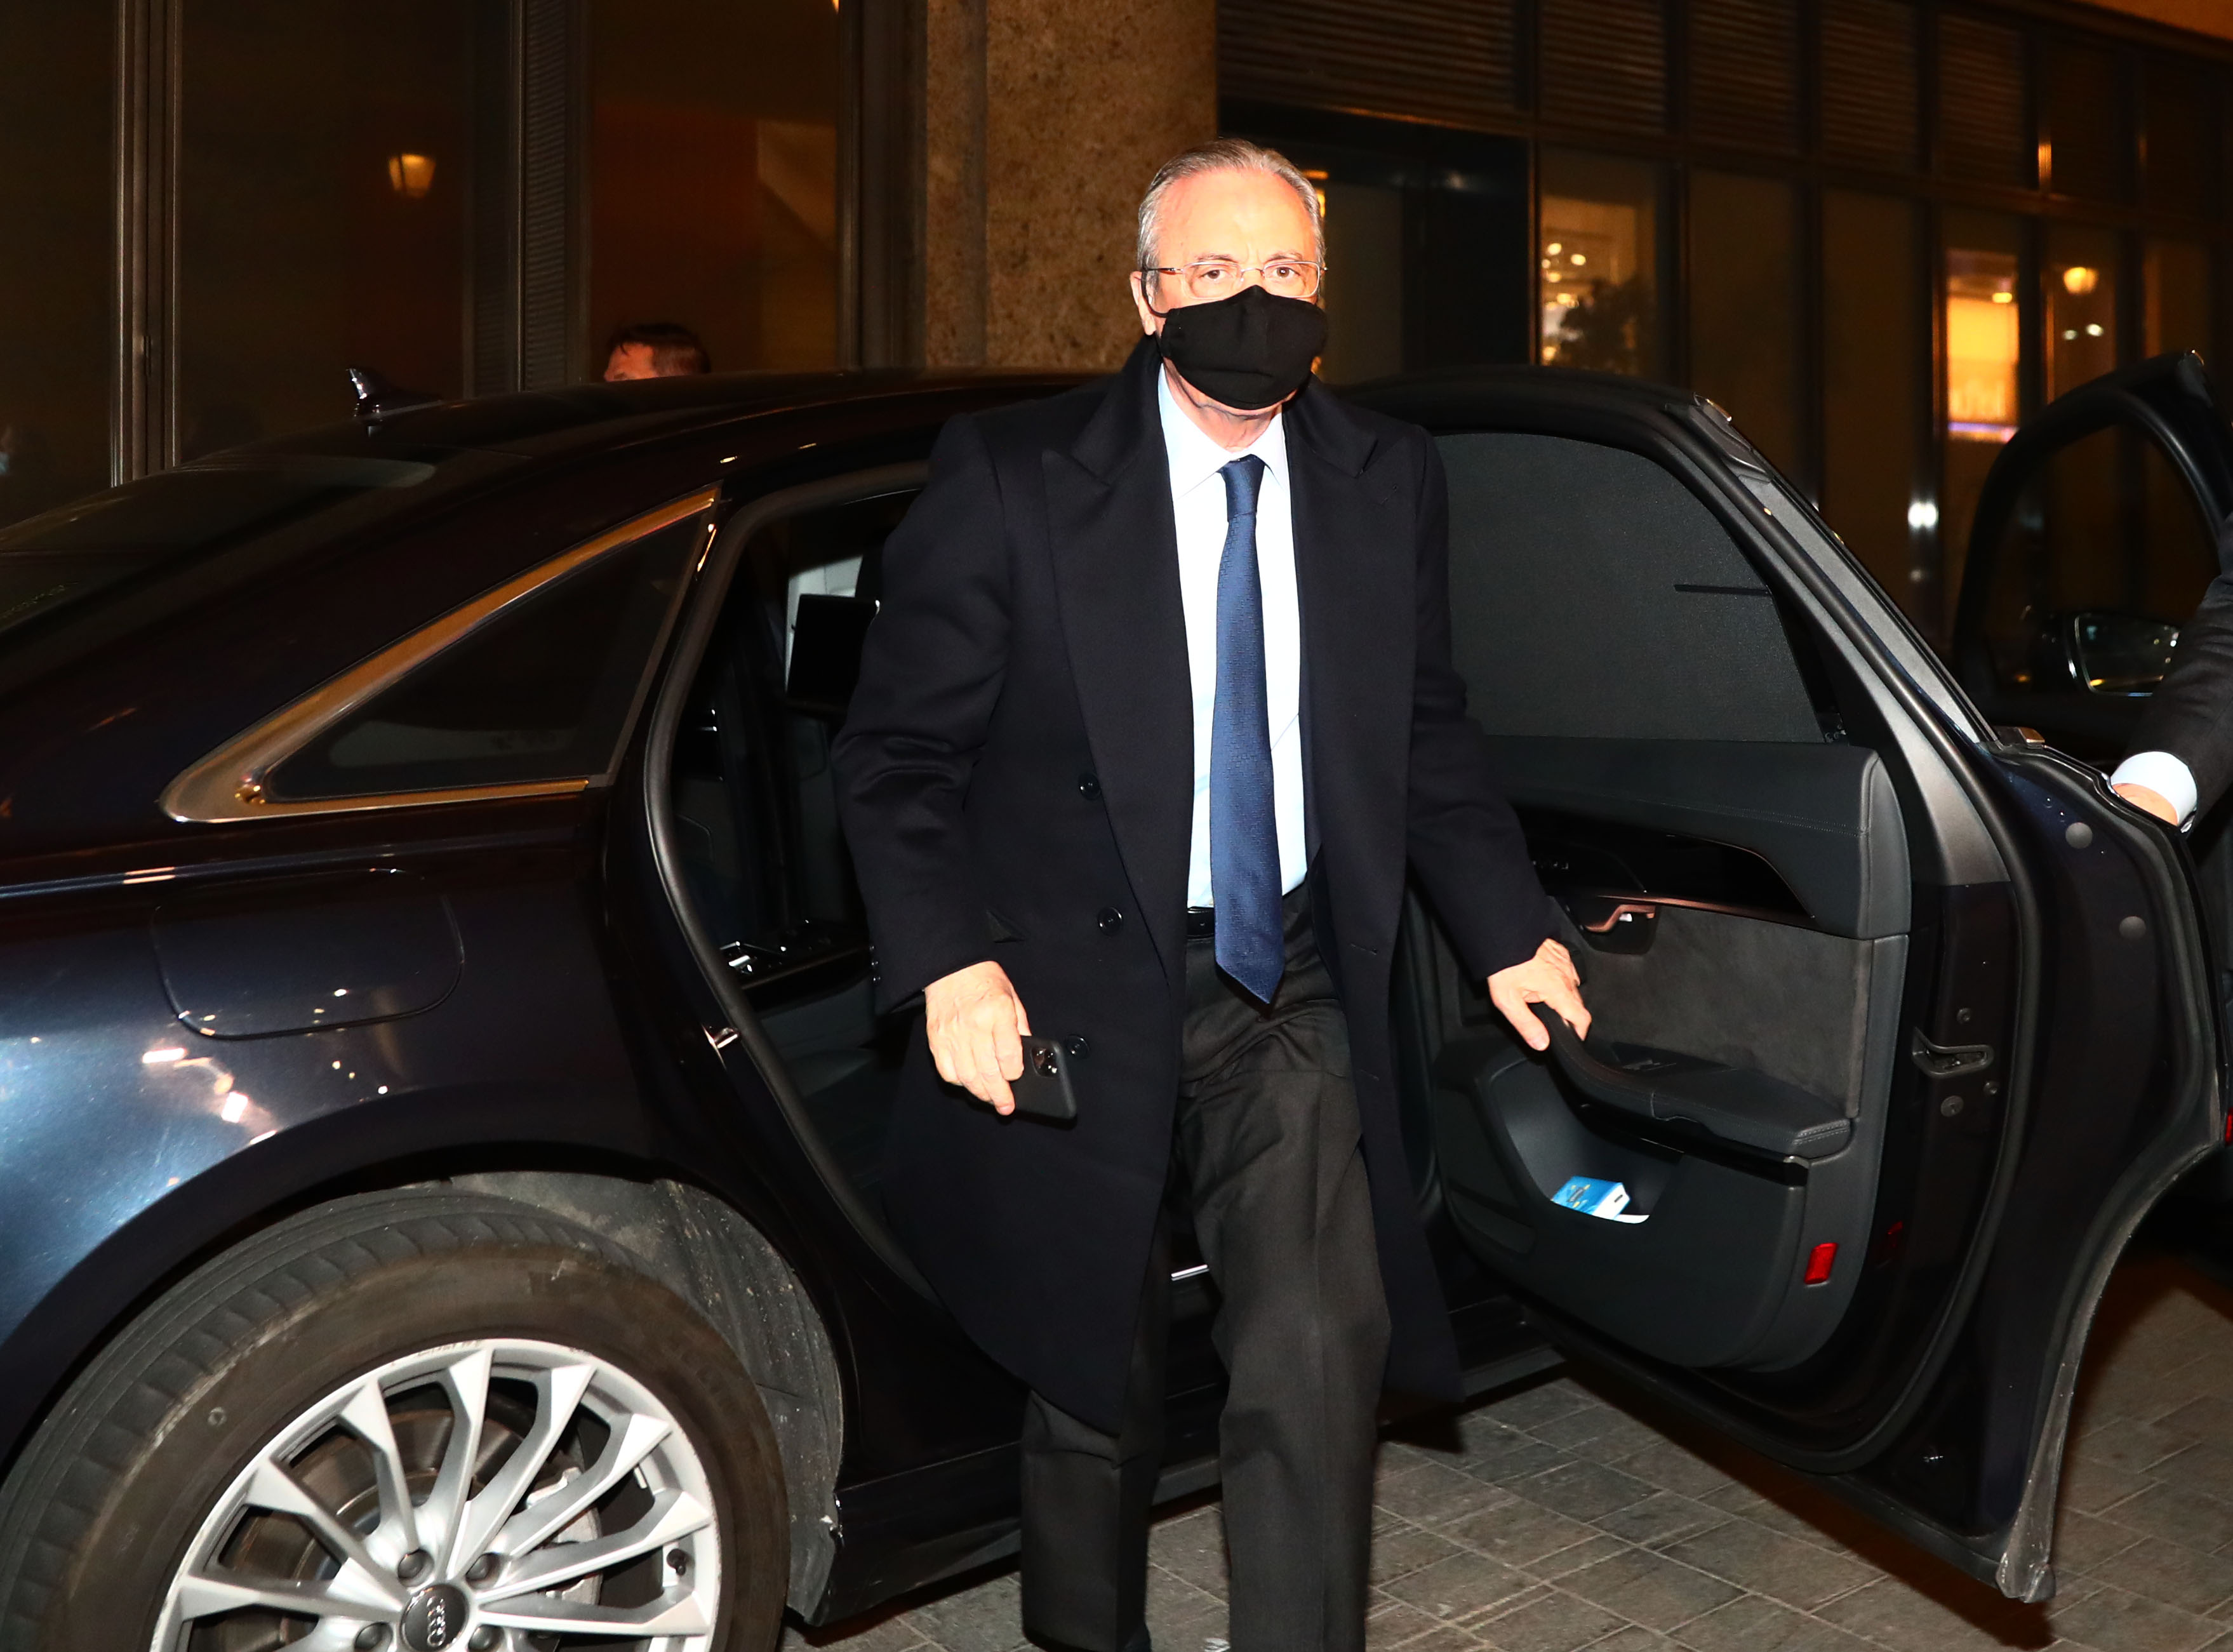 Real Madrid president Florentino Perez arrives at a radio station in Madrid